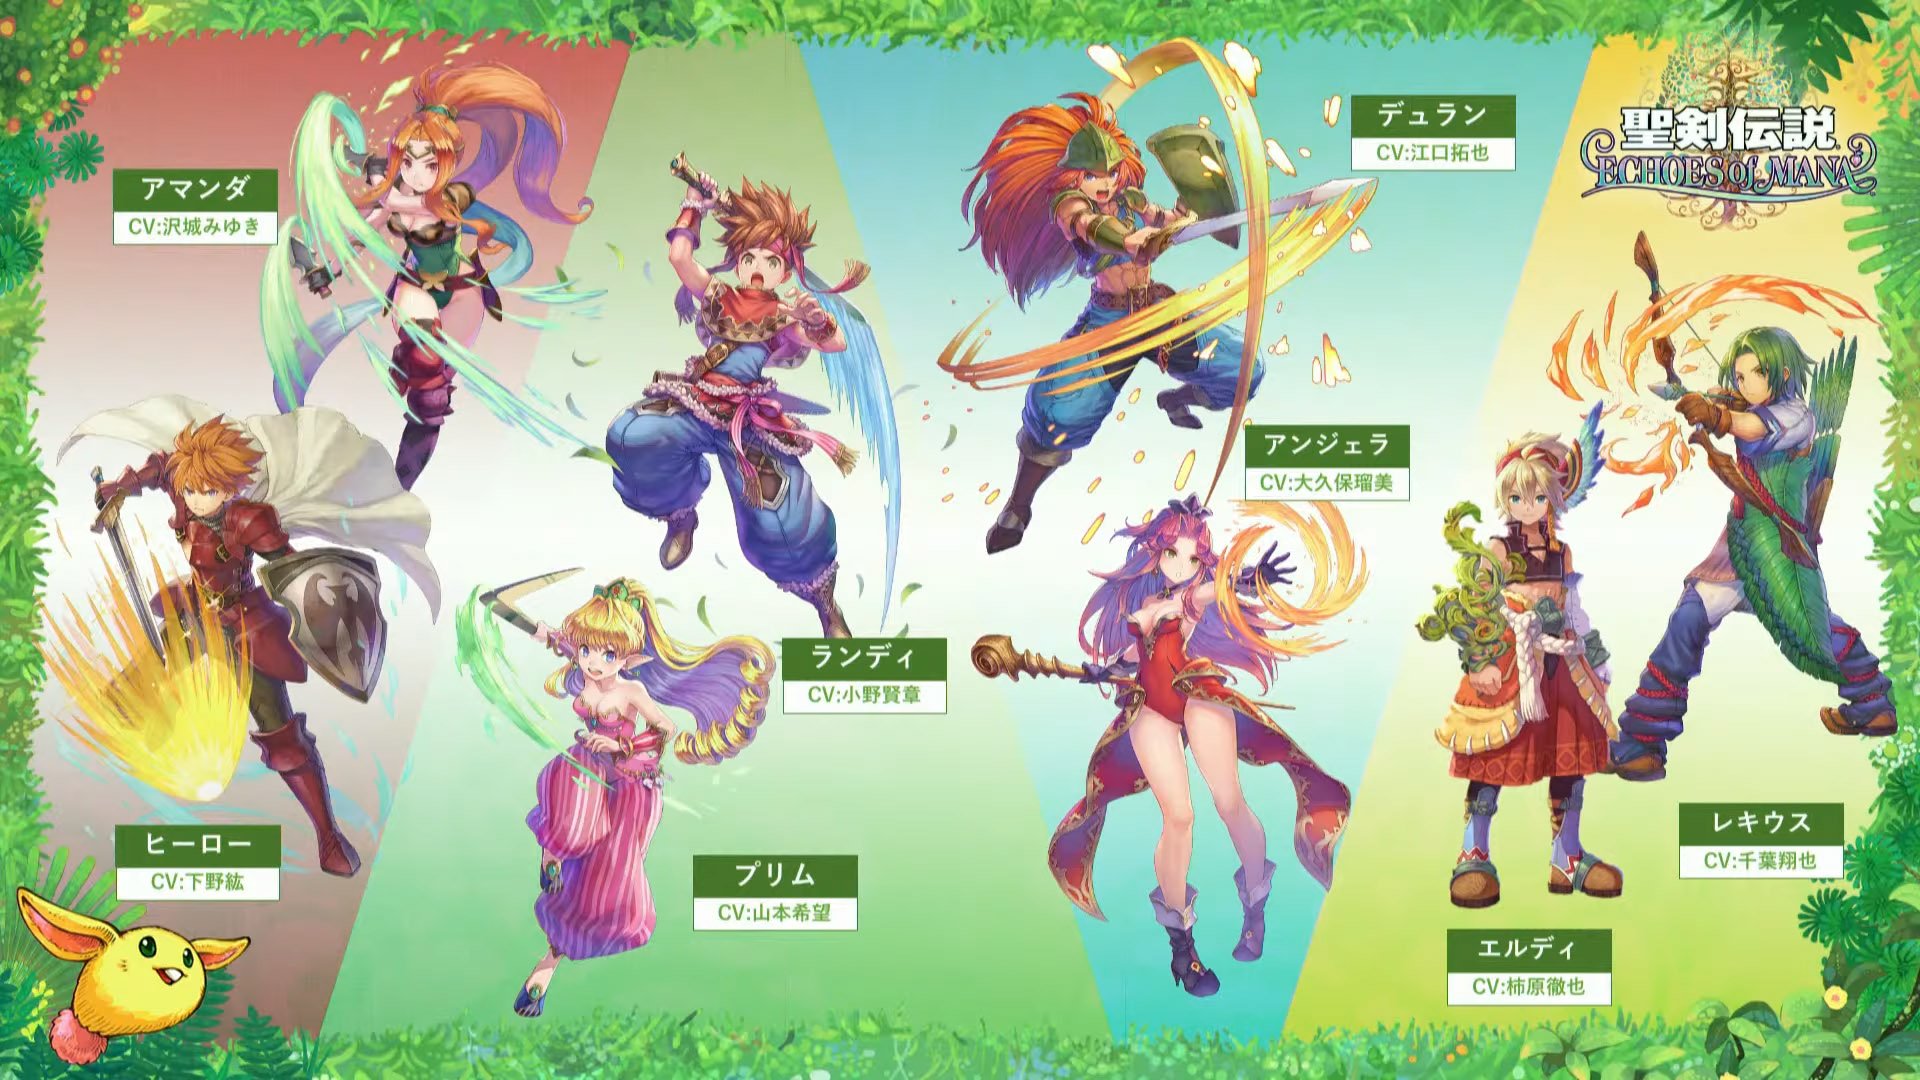 The Legend of Mana Anime Release Date 